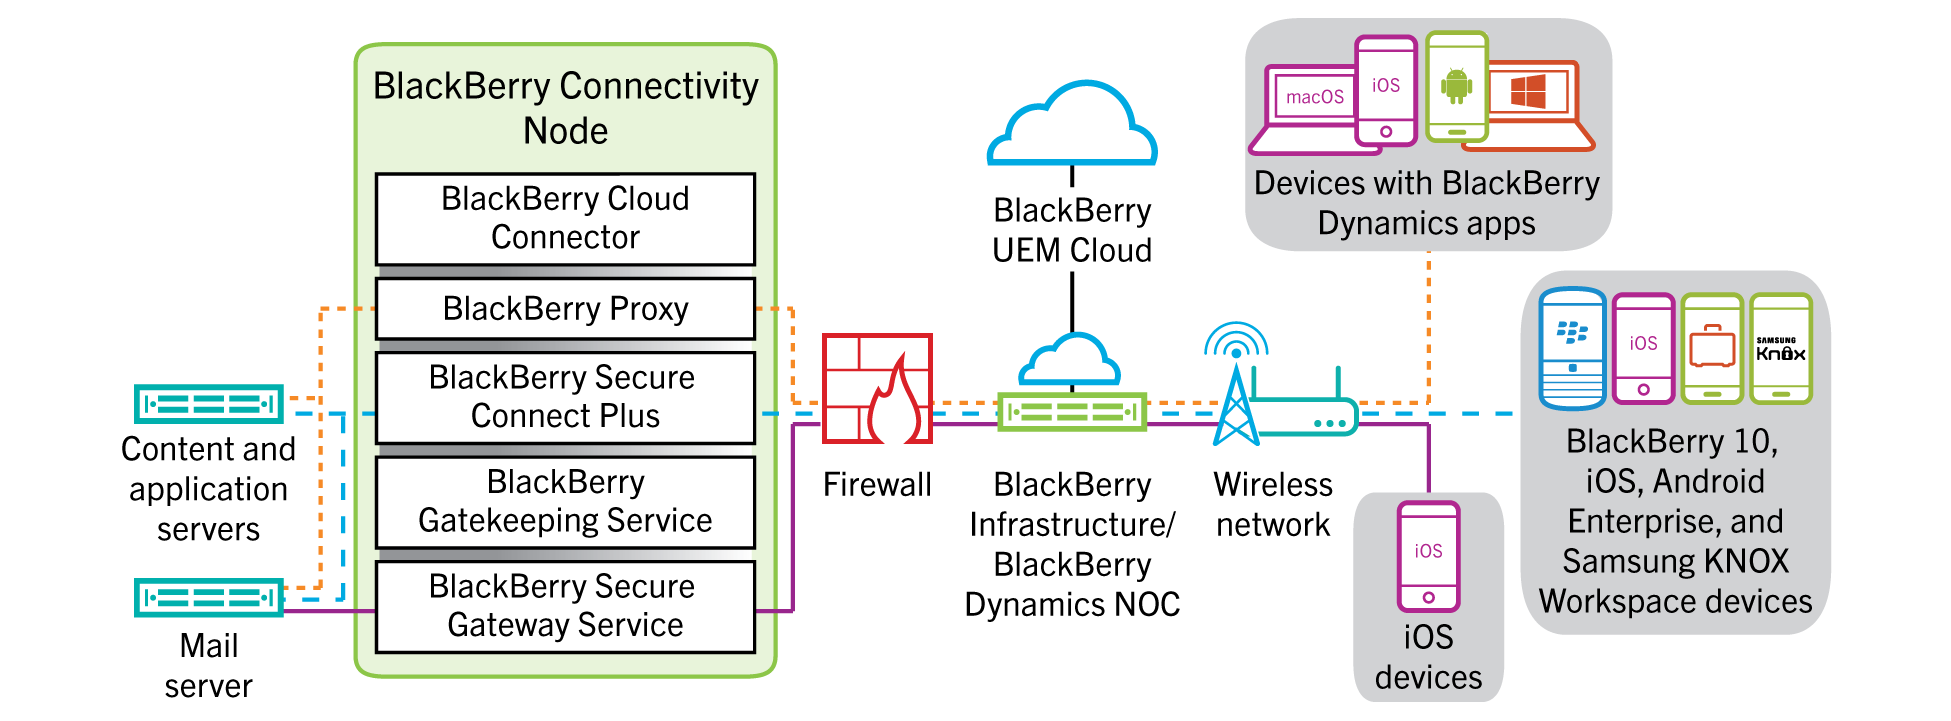 Diagram showng possible data paths to and from devices through the BlackBerry Infrastructure